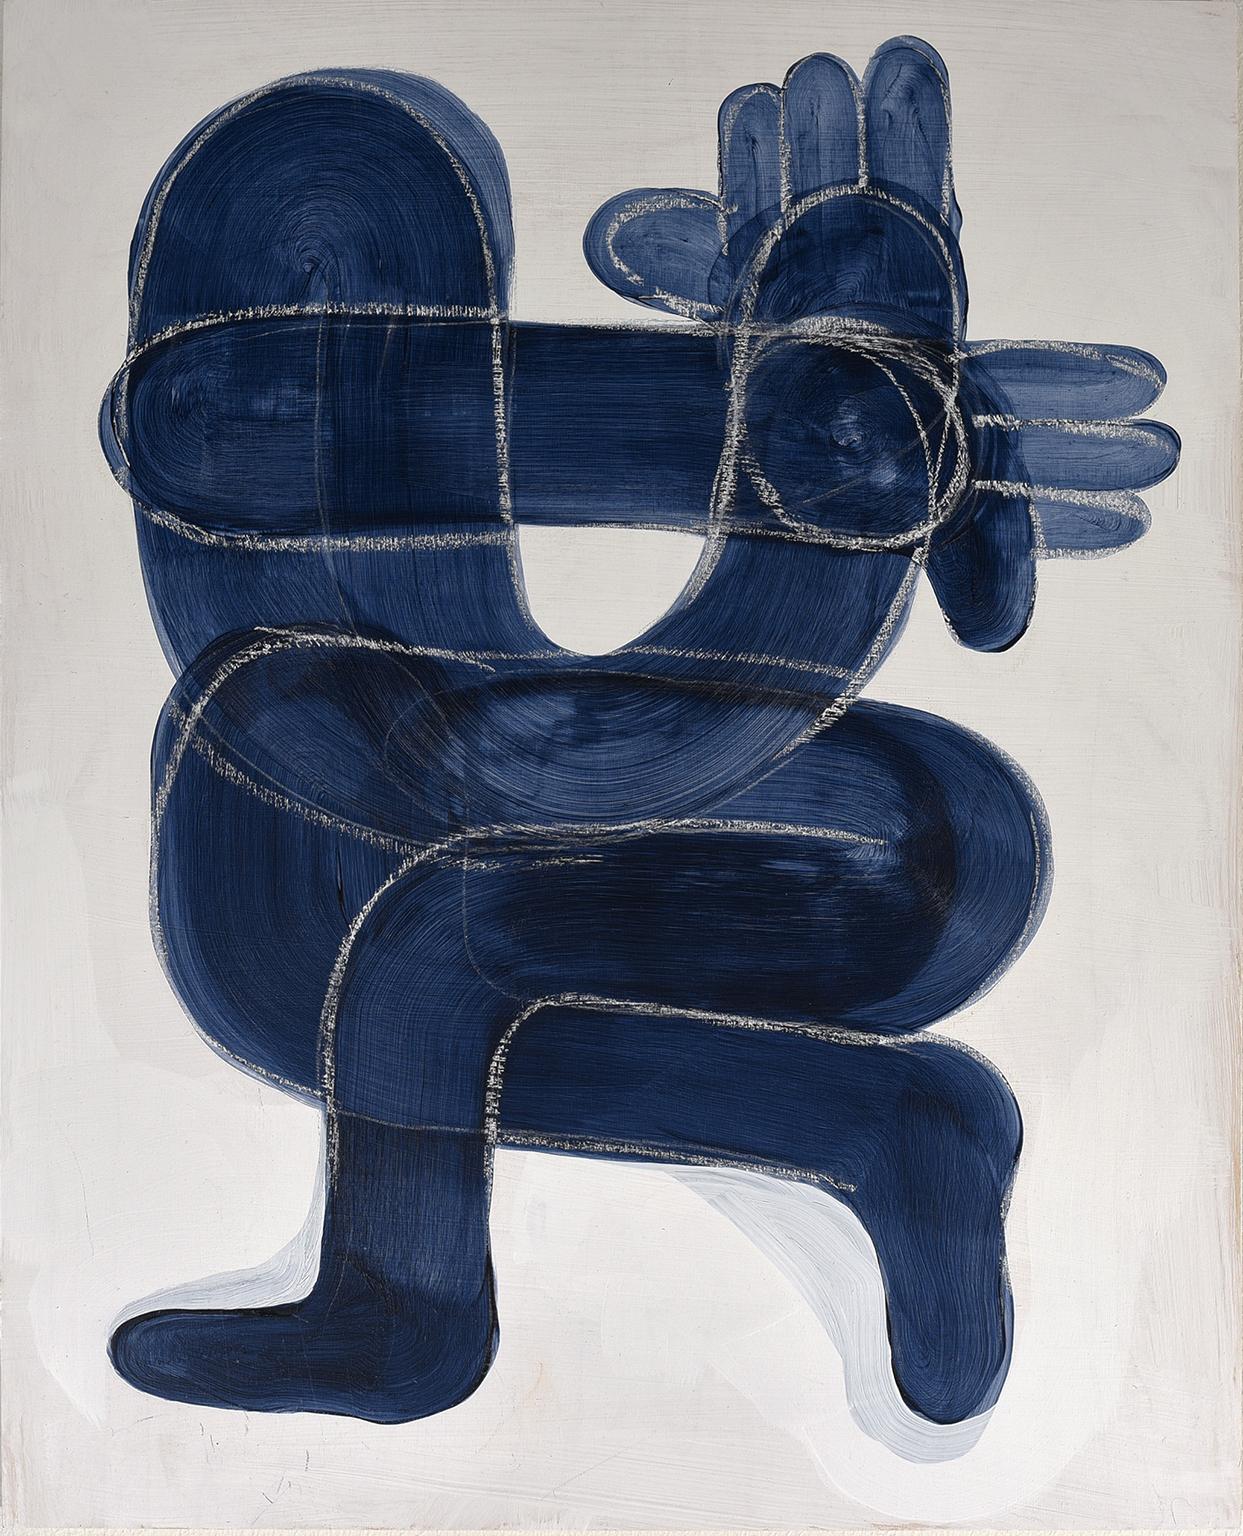 Kyle Andrew Steed Figurative Print - The feeling you get when you can't put your finger on something. Blue figurative